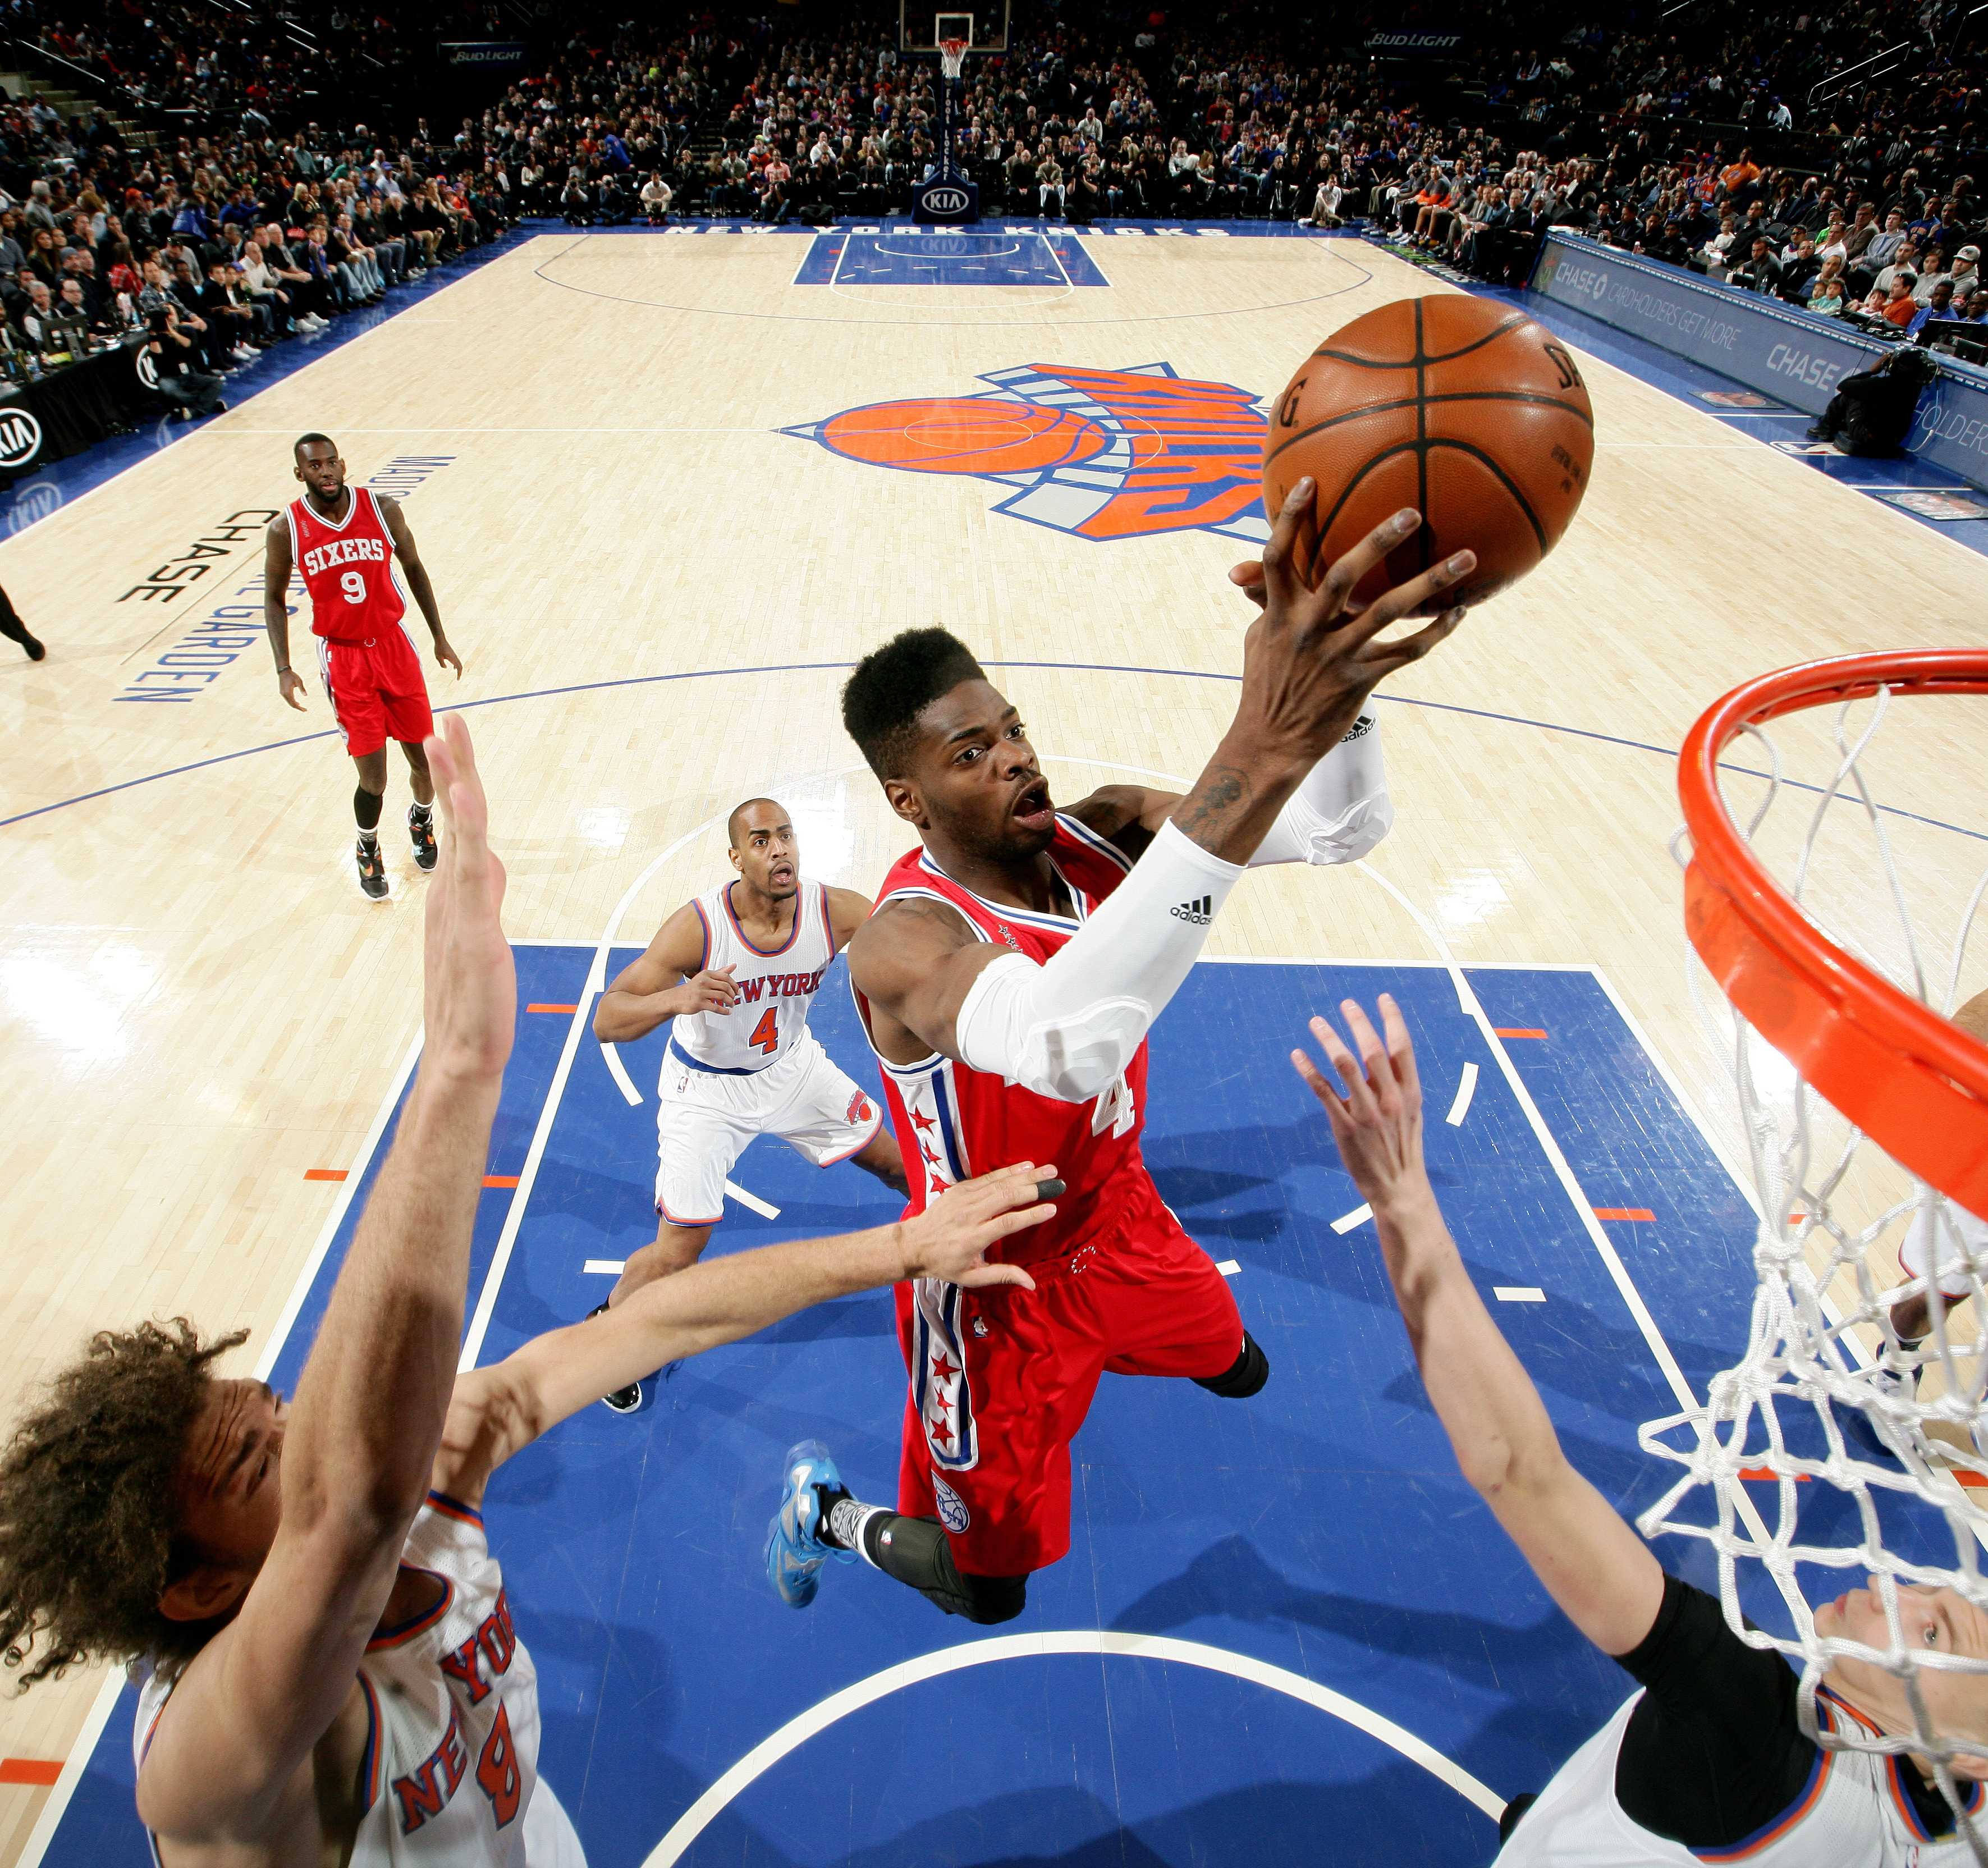 Sixers Nerlens Noel. Copyright 2016 NBAE (Photo by Nathaniel S. Butler/NBAE via Getty Images)